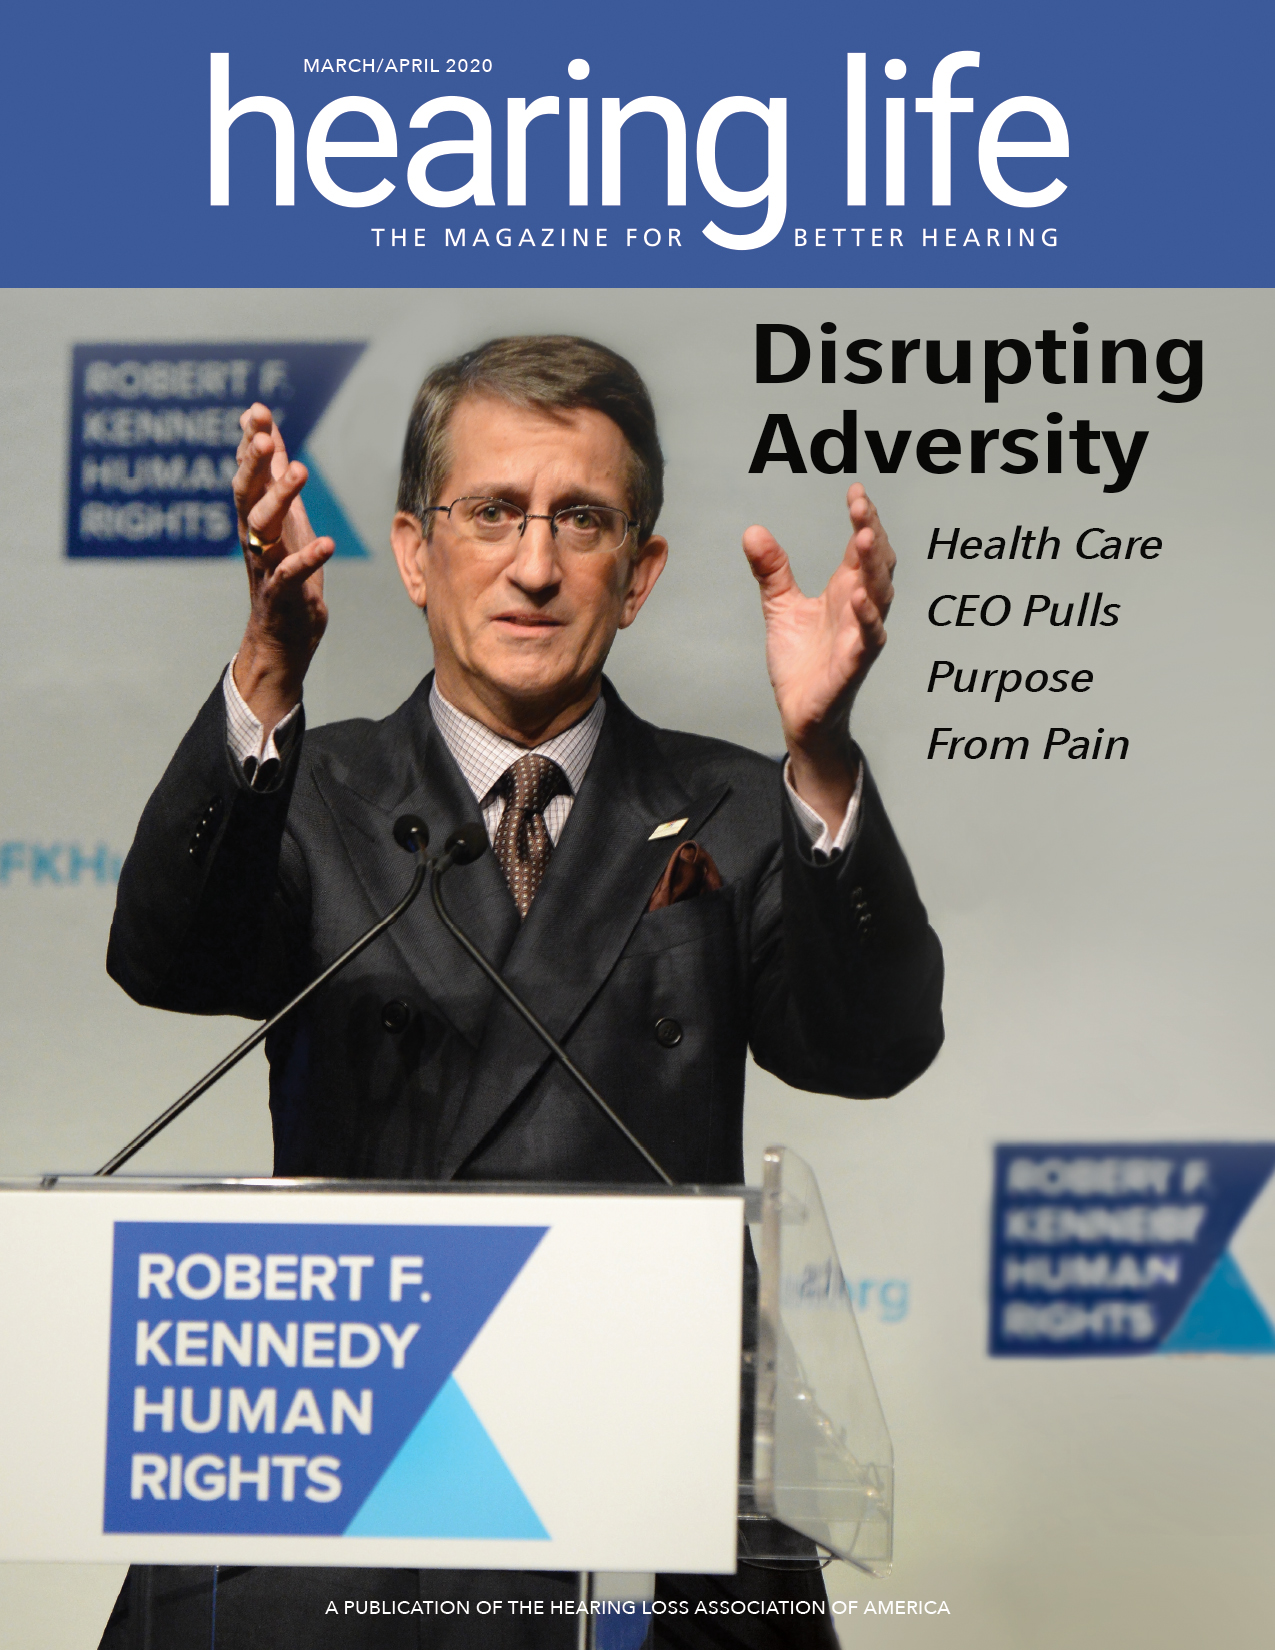 Donato Tramuto, CEO of Tivity Health, Inc. on the cover of Hearing Life - Disrupting Adversity Health Care CEO Pulls Puspose from Pain